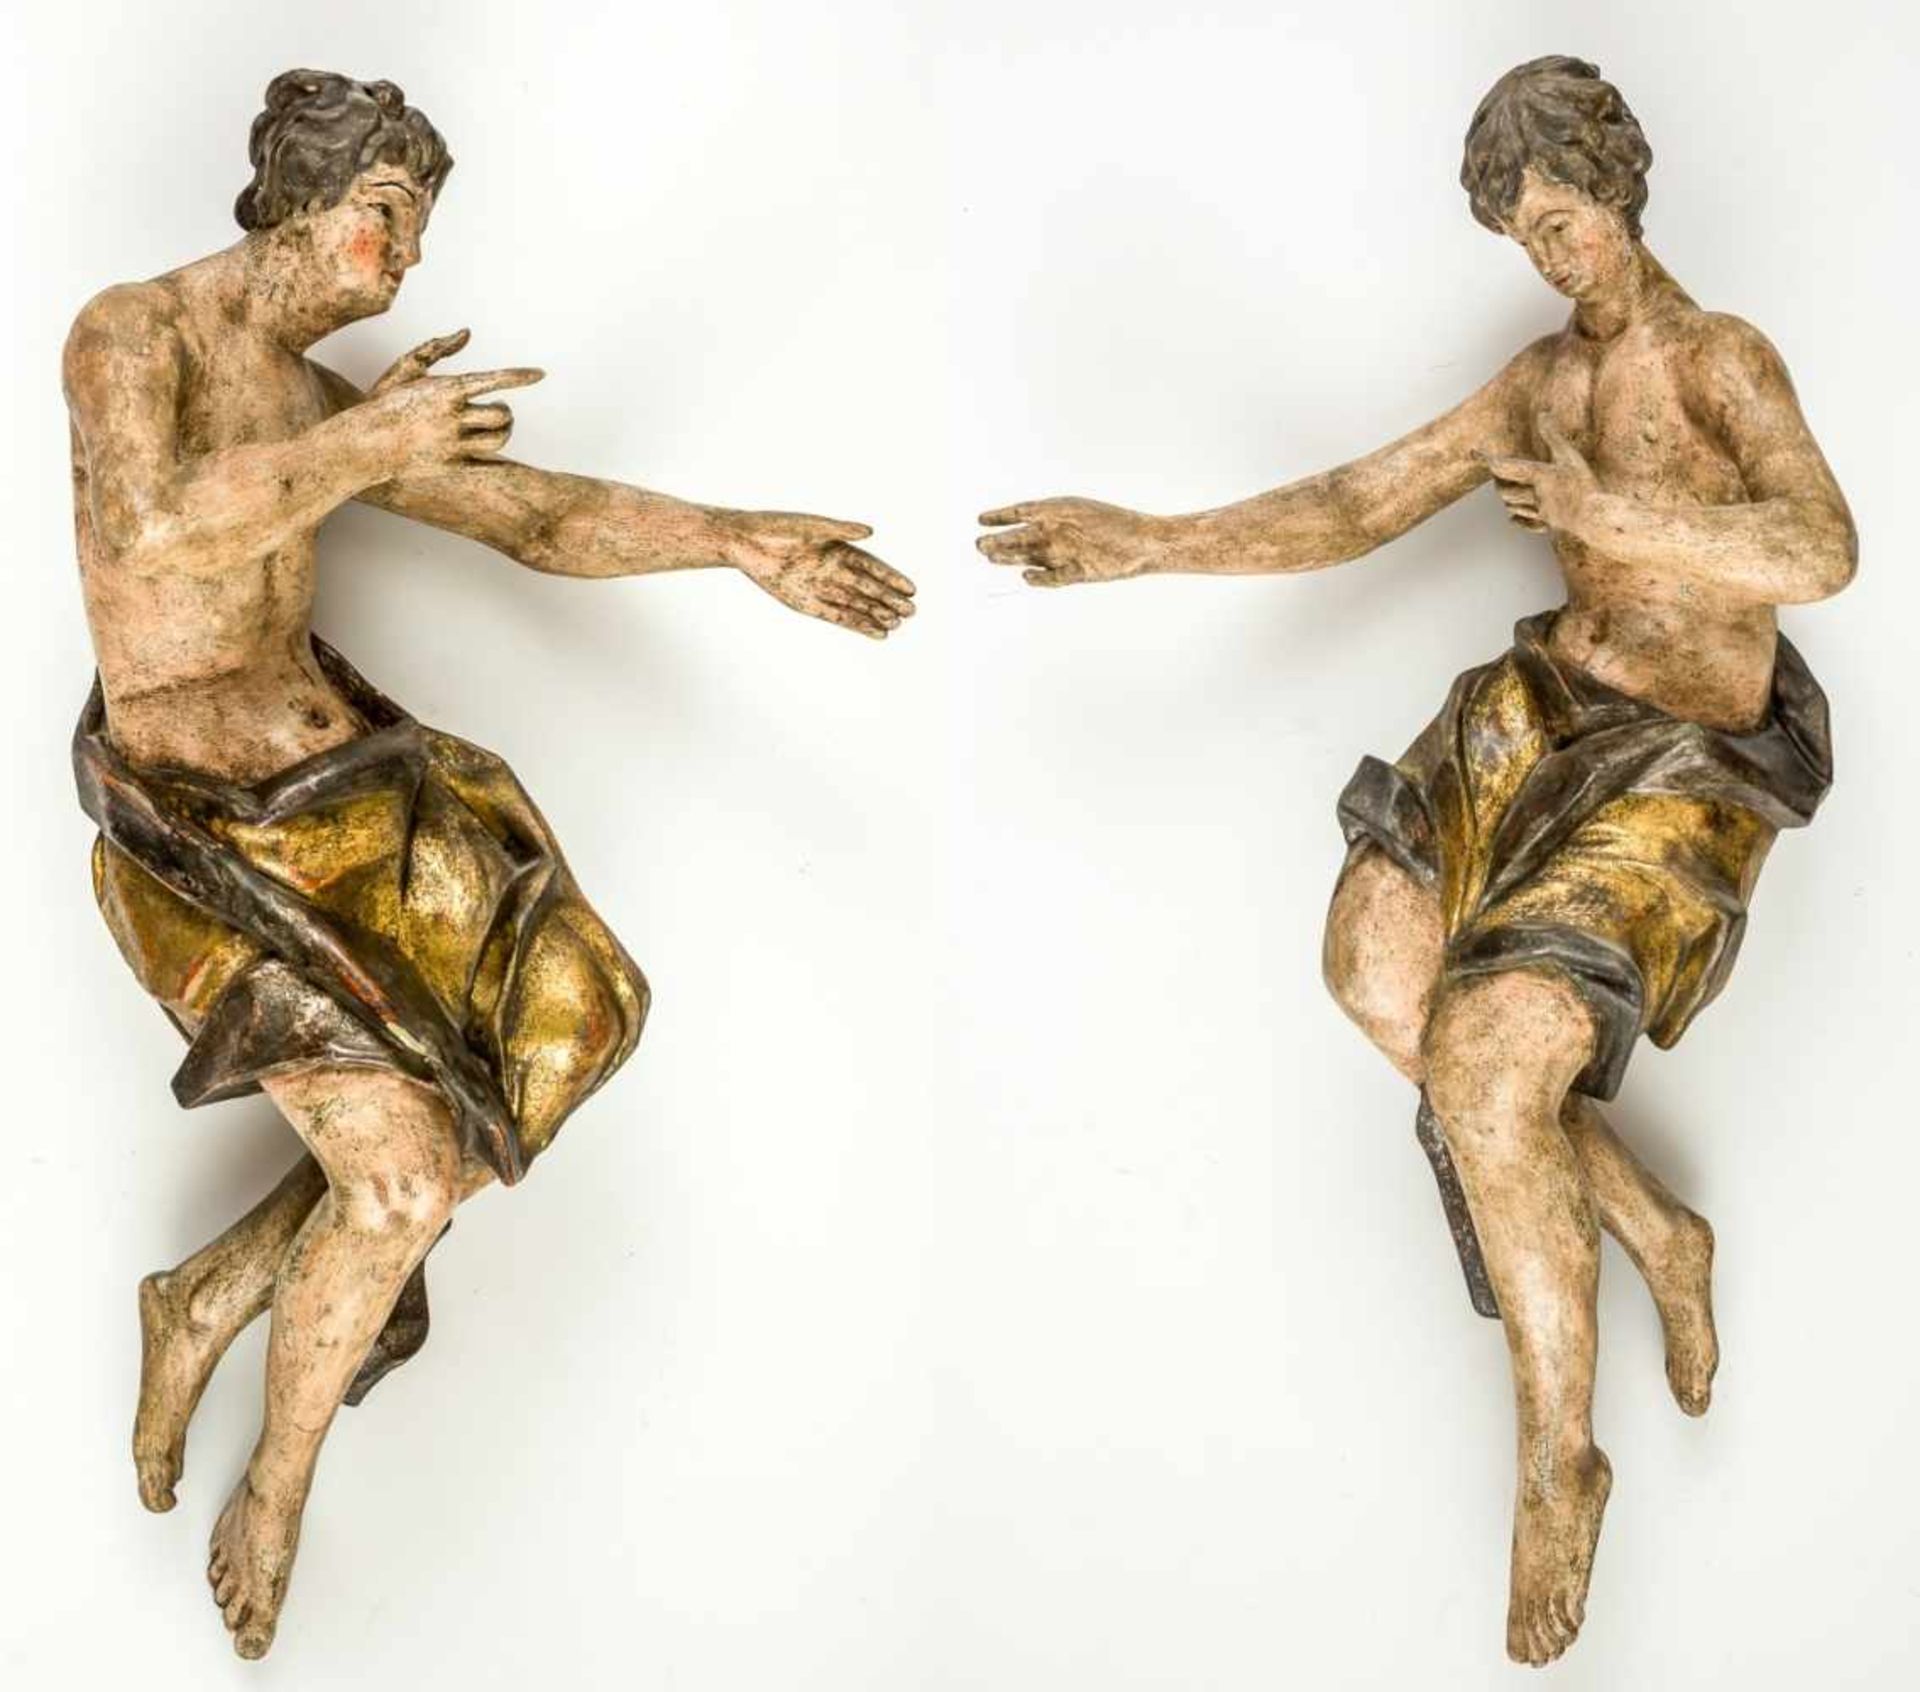 A pair of monumental Adoration Angels, South German region, baroque wood carving, early18th century,